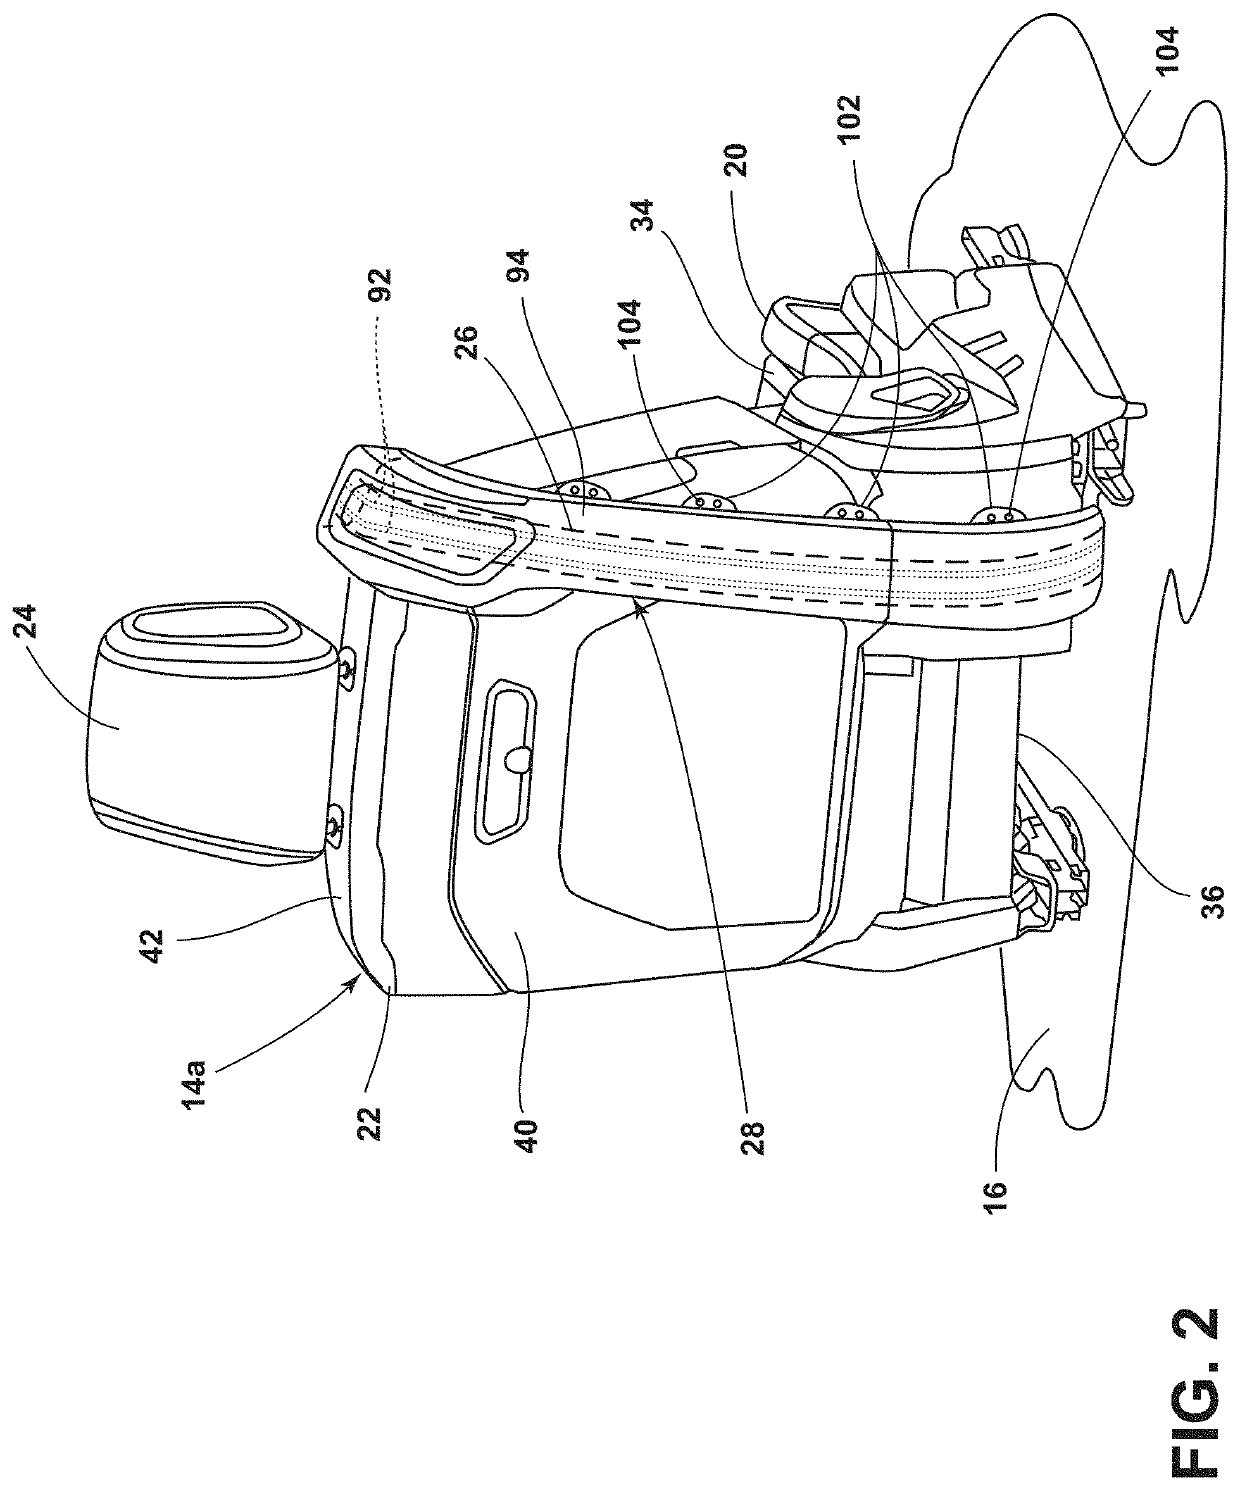 Seating assembly for a vehicle with emitters of ultraviolet C radiation to disinfect seatbelt webbing